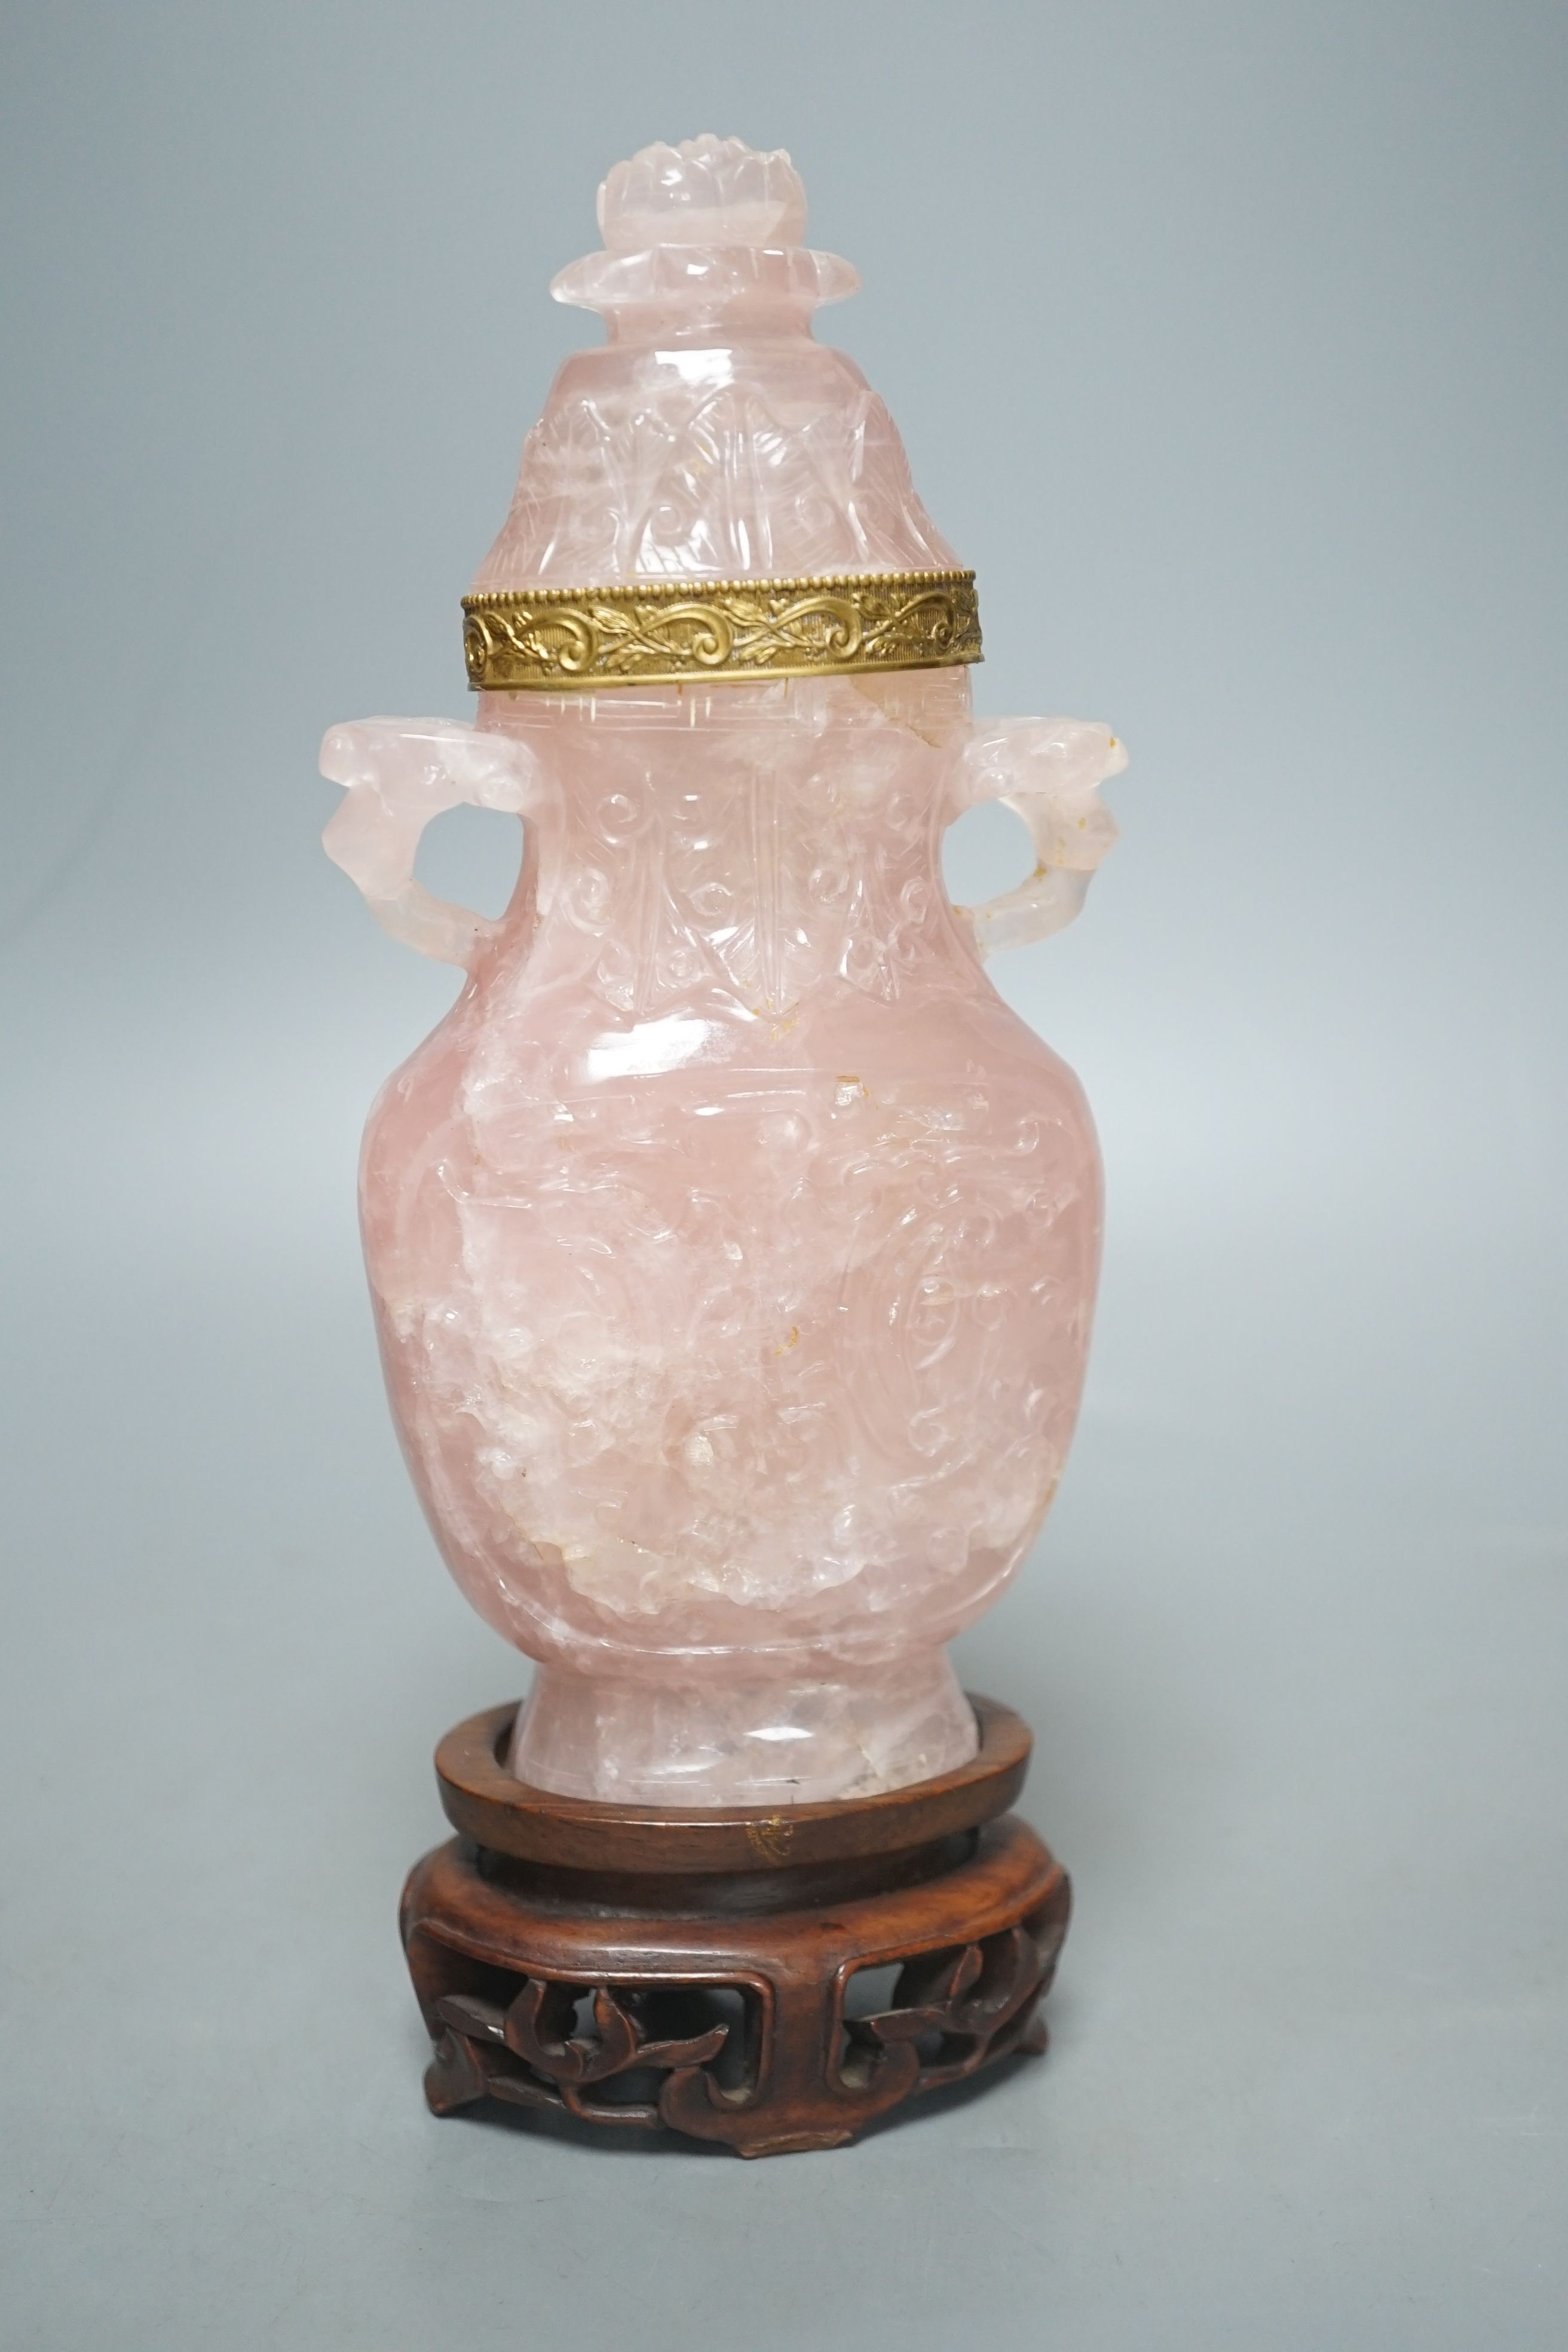 A late 19th/early 20th century Chinese carved rose quartz vase and cover, on a Hongmu stand, 23.5 cm high including stand.